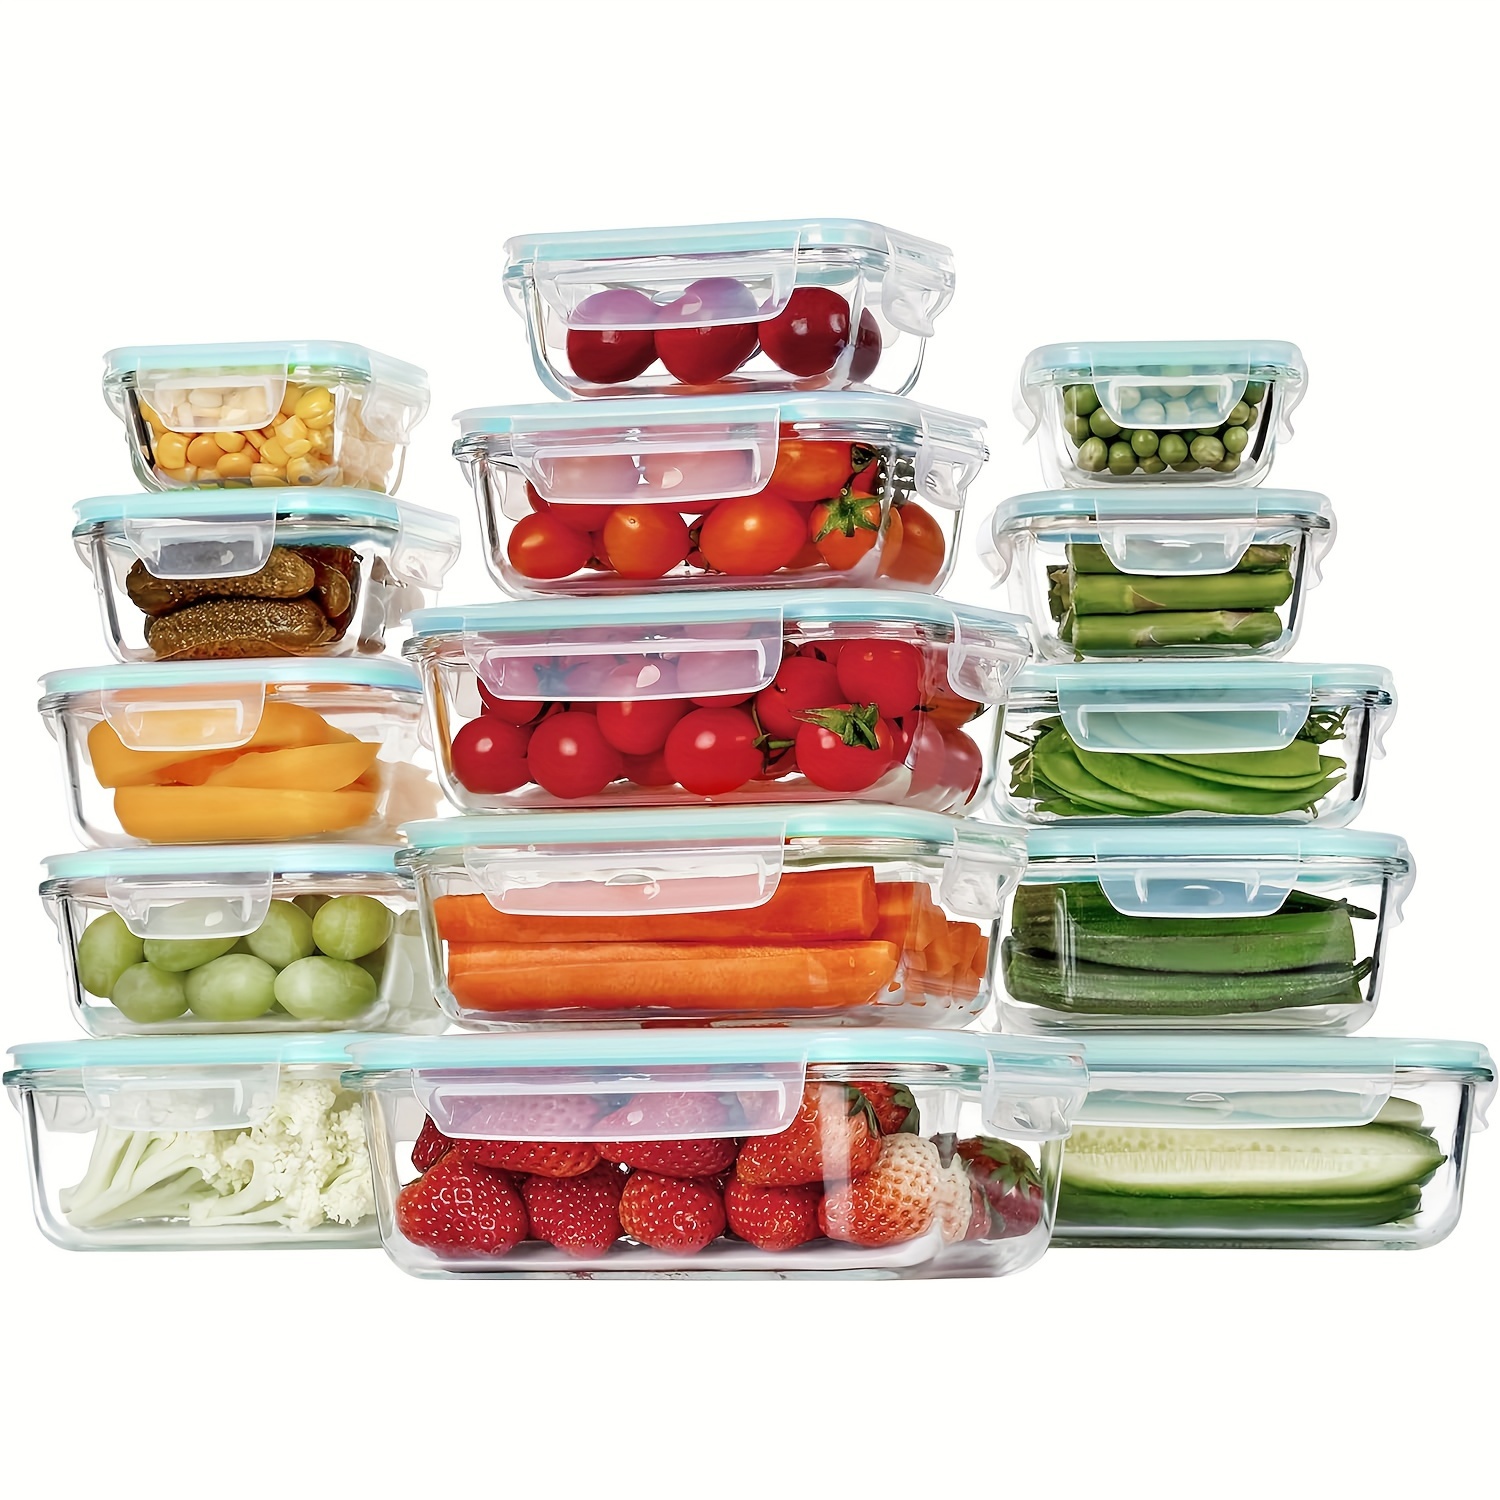 

15 Pack Glass Food Storage Containers, Meal Prep Containers, Airtight Glass Bento Boxes With Leak Proof Locking Lids, For Microwave, Oven, Freezer And Dishwasher